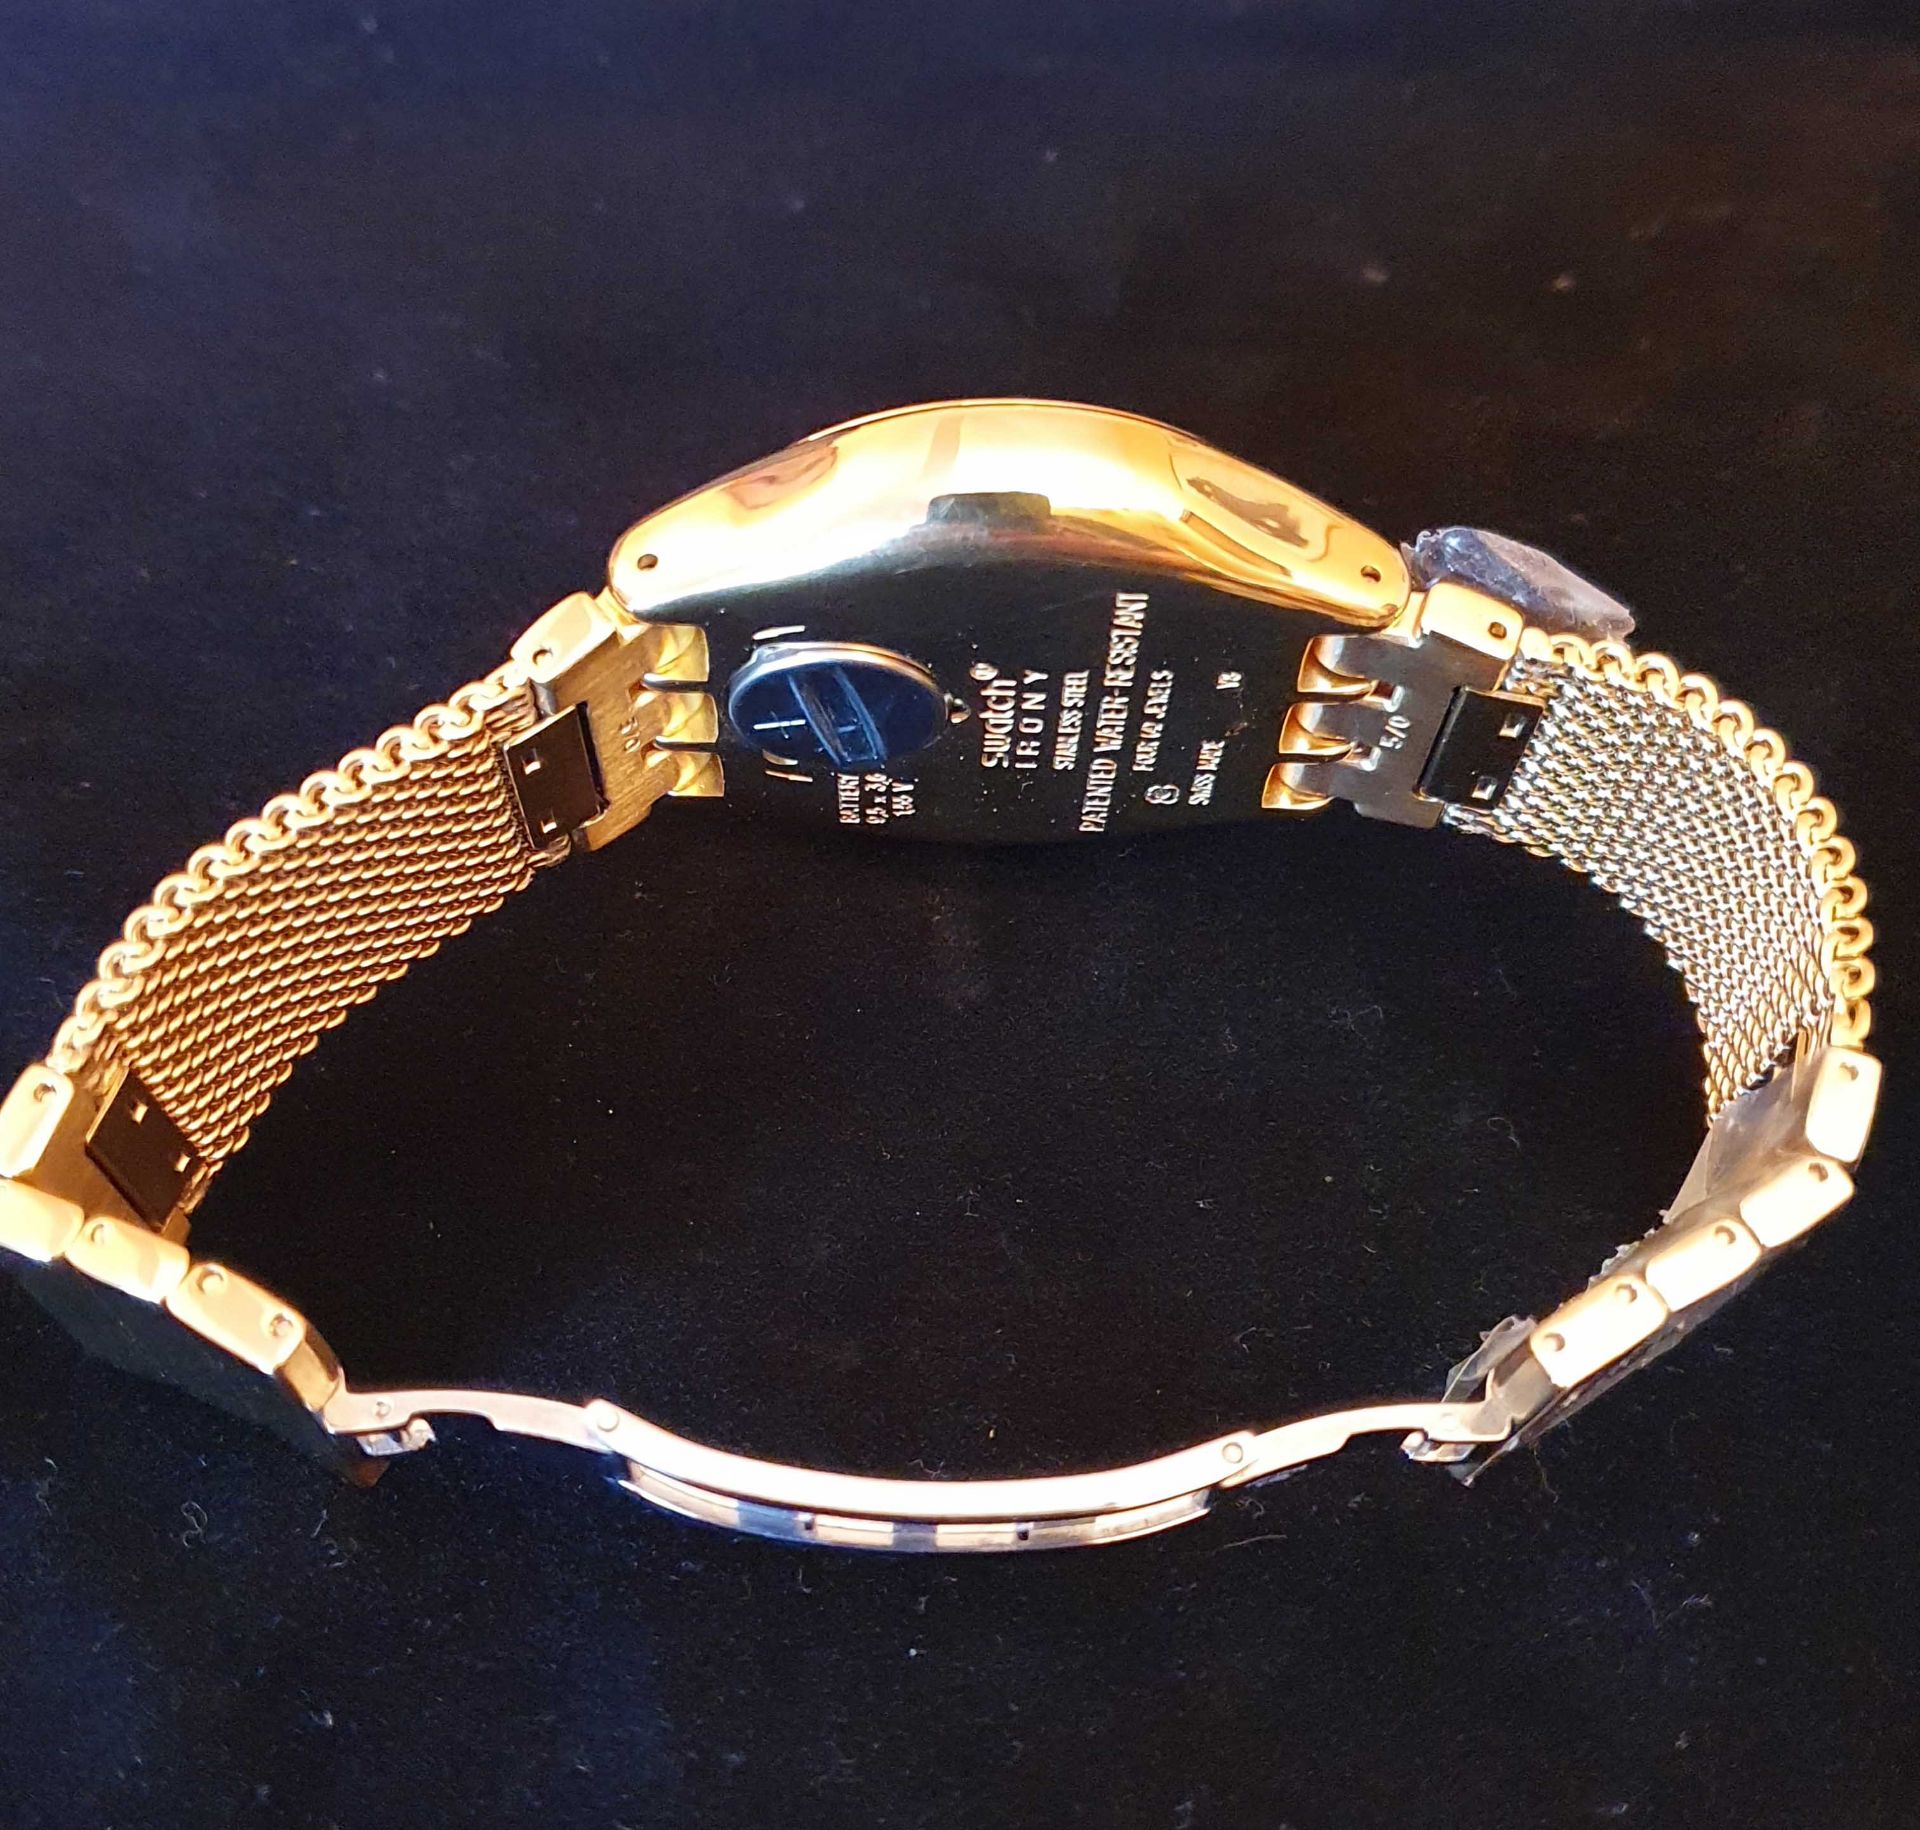 SWATCH ‘Irony’ Date, Chronograph Watch with Approx. 24cm Bracelet, Plated Stainless Steel. Unworn, - Image 3 of 5